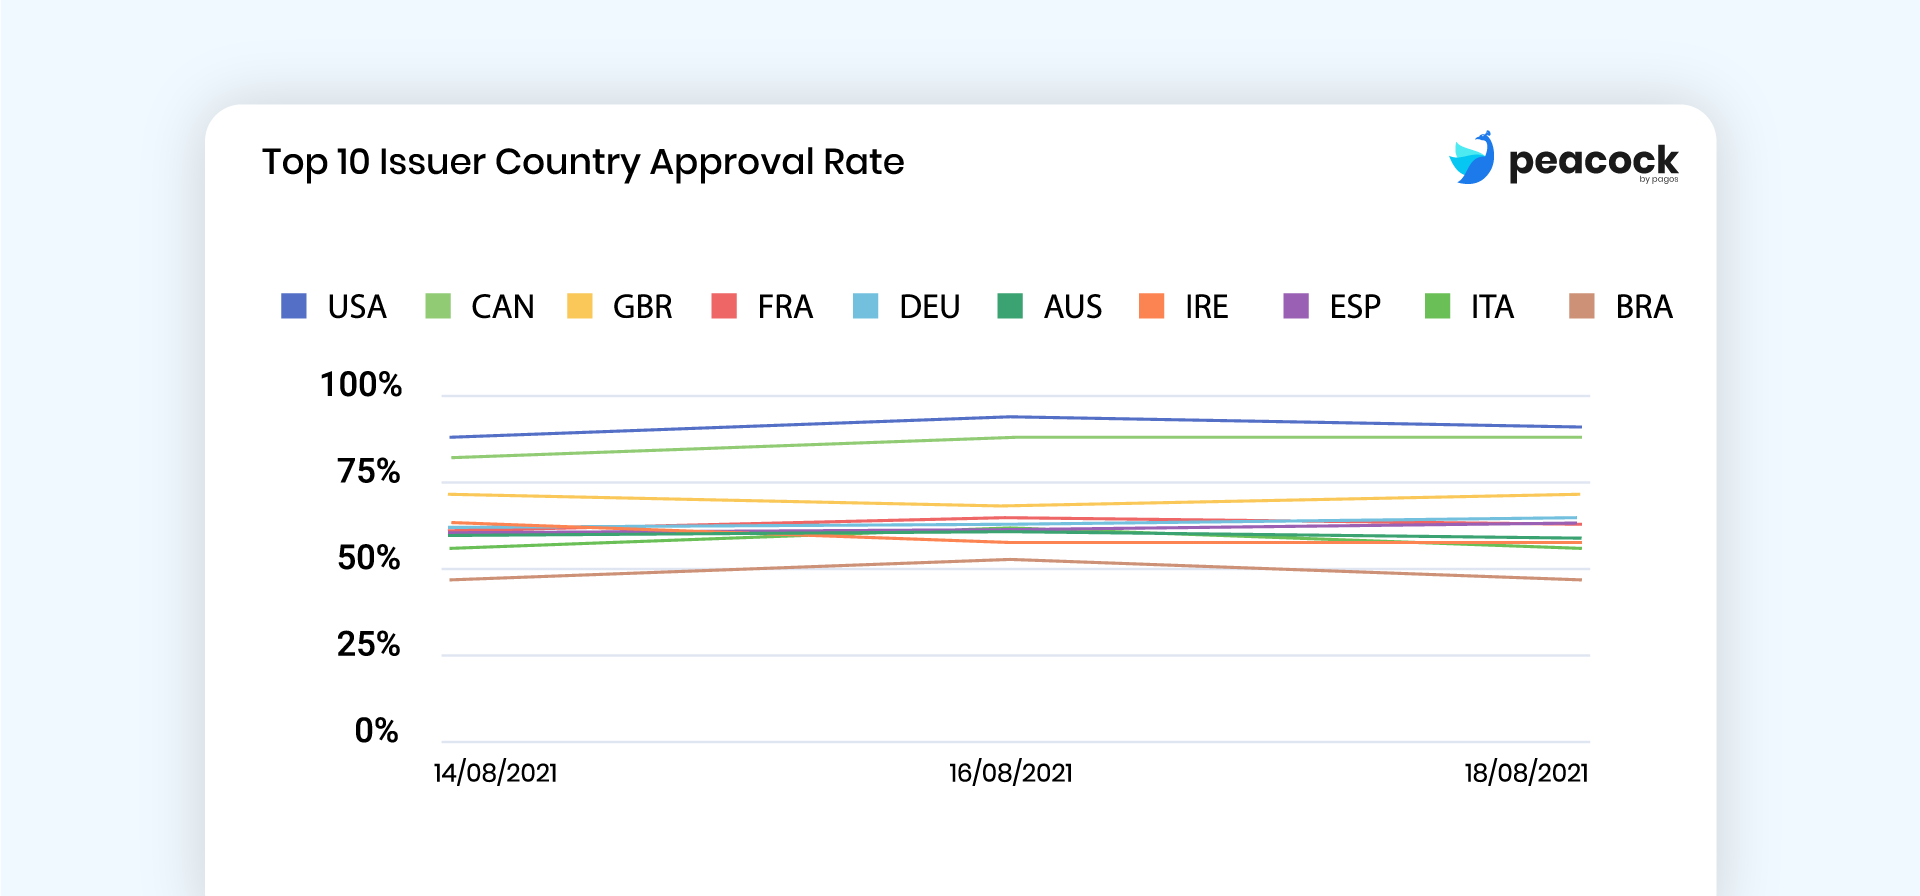 Chart illustrating approval rates by top ten issuing countries